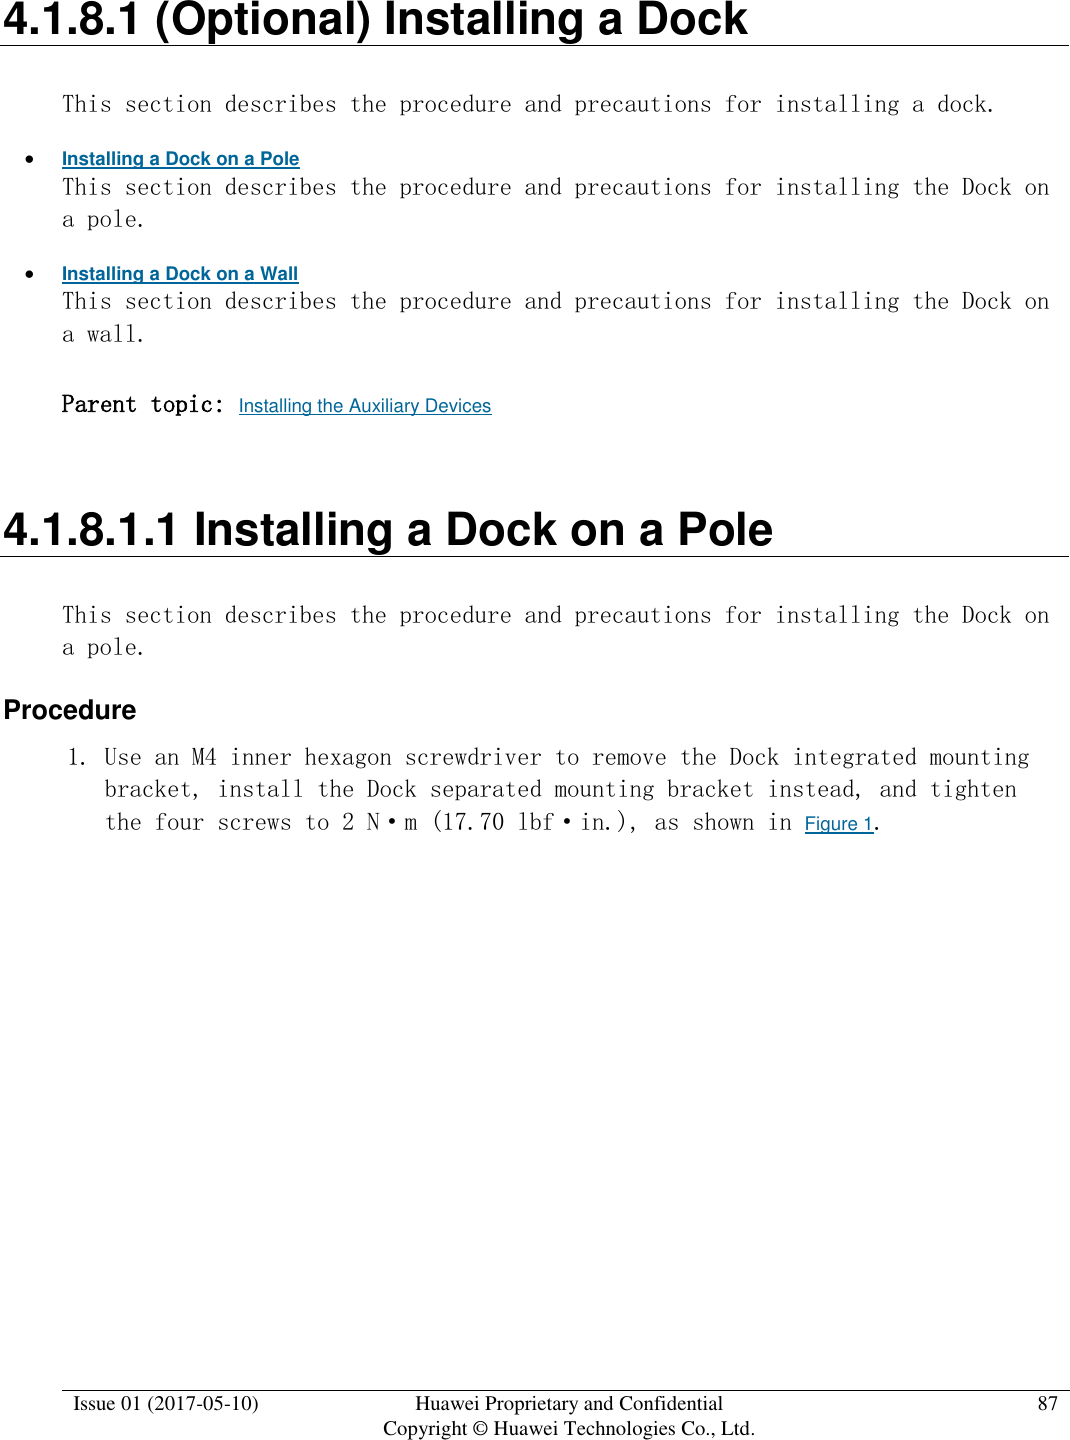  Issue 01 (2017-05-10) Huawei Proprietary and Confidential      Copyright © Huawei Technologies Co., Ltd. 87  4.1.8.1 (Optional) Installing a Dock This section describes the procedure and precautions for installing a dock.  Installing a Dock on a Pole This section describes the procedure and precautions for installing the Dock on a pole.  Installing a Dock on a Wall This section describes the procedure and precautions for installing the Dock on a wall. Parent topic: Installing the Auxiliary Devices 4.1.8.1.1 Installing a Dock on a Pole This section describes the procedure and precautions for installing the Dock on a pole. Procedure 1. Use an M4 inner hexagon screwdriver to remove the Dock integrated mounting bracket, install the Dock separated mounting bracket instead, and tighten the four screws to 2 N·m (17.70 lbf·in.), as shown in Figure 1.  